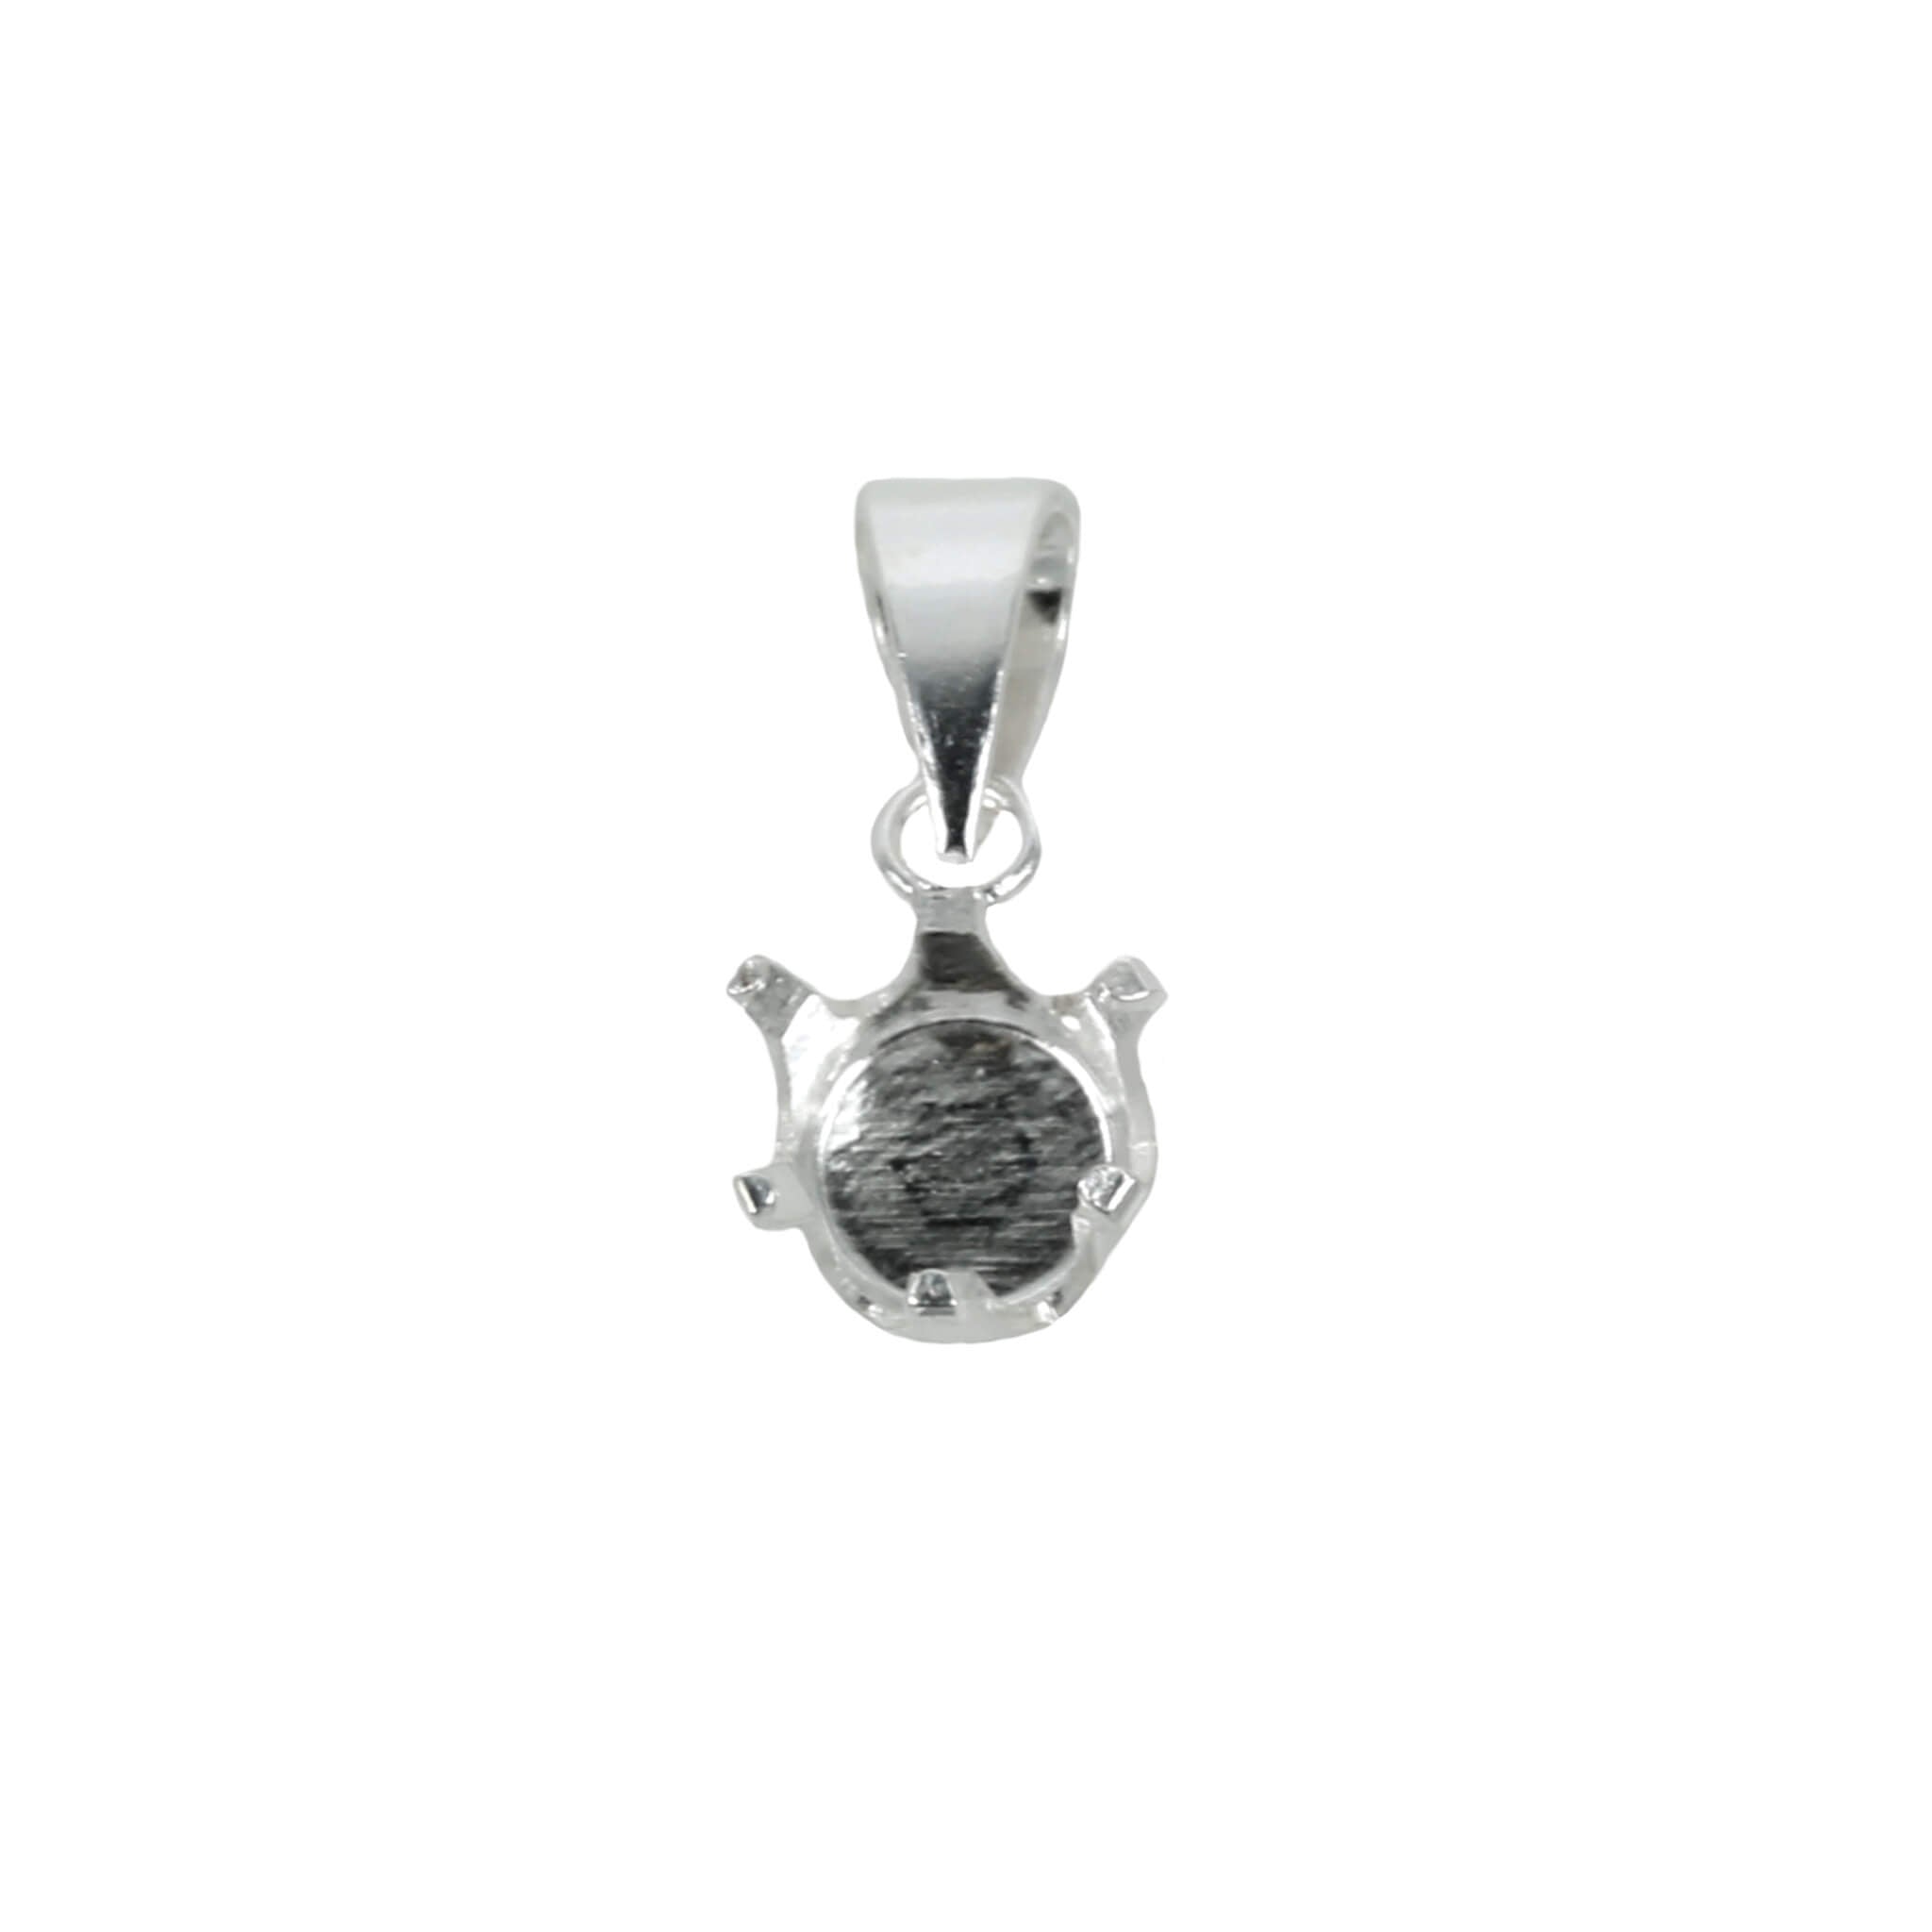 Six-Prong Pendant with Soldered Loop and Bail in Sterling Silver 6mm